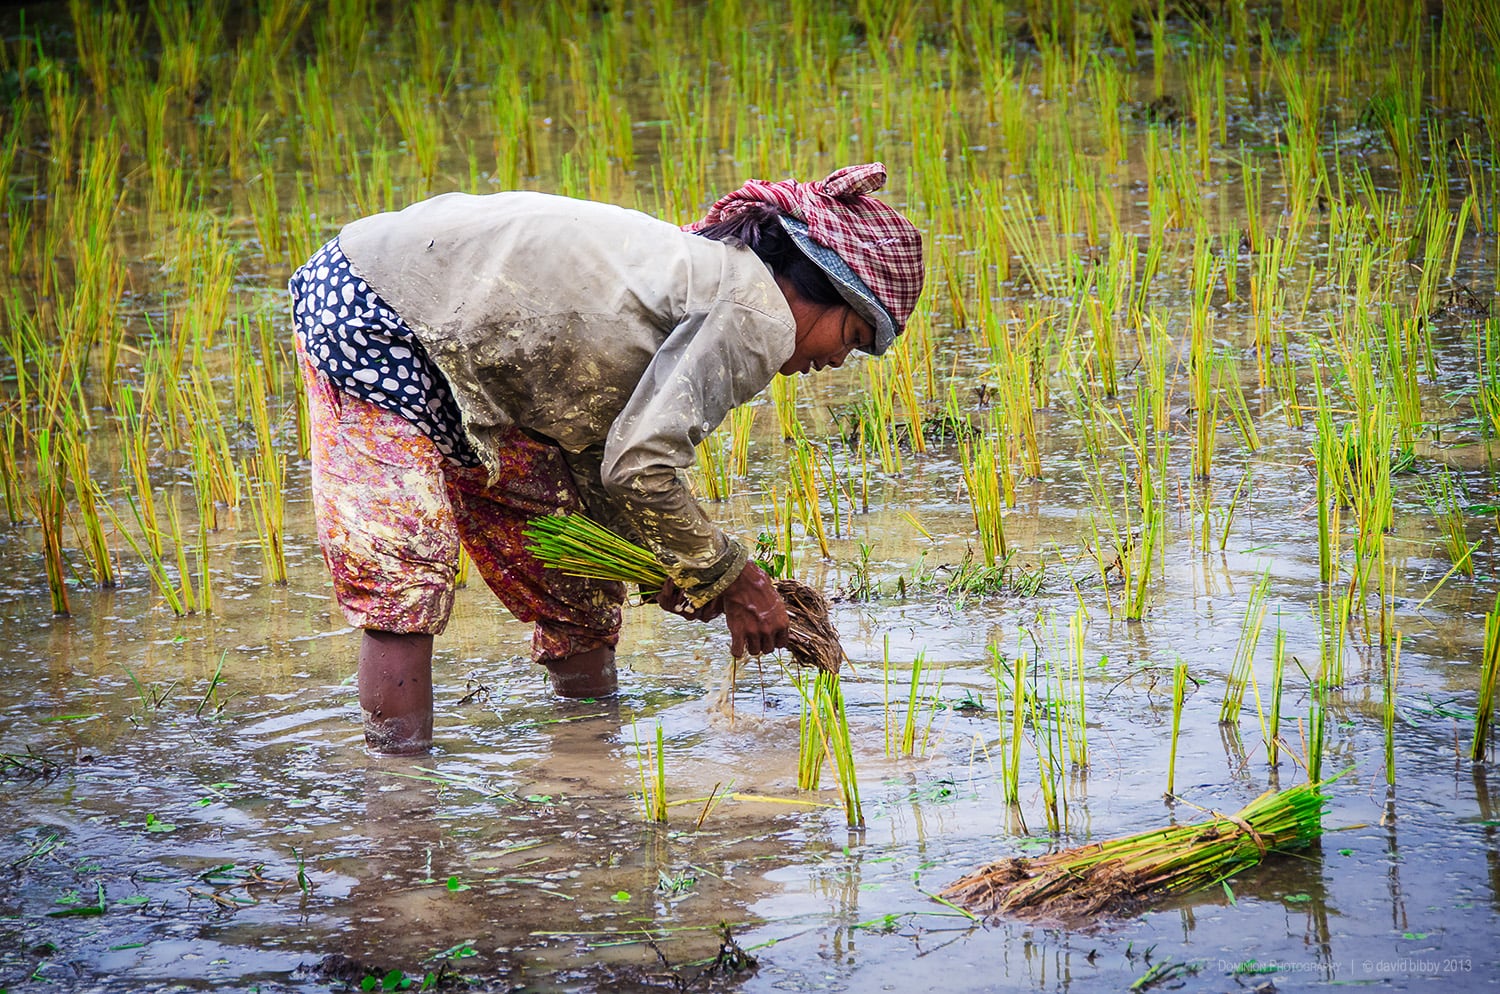   Hard labour  - Planting rice is very hard work and not great for the spine. Kampong Cham Province, Cambodia.   